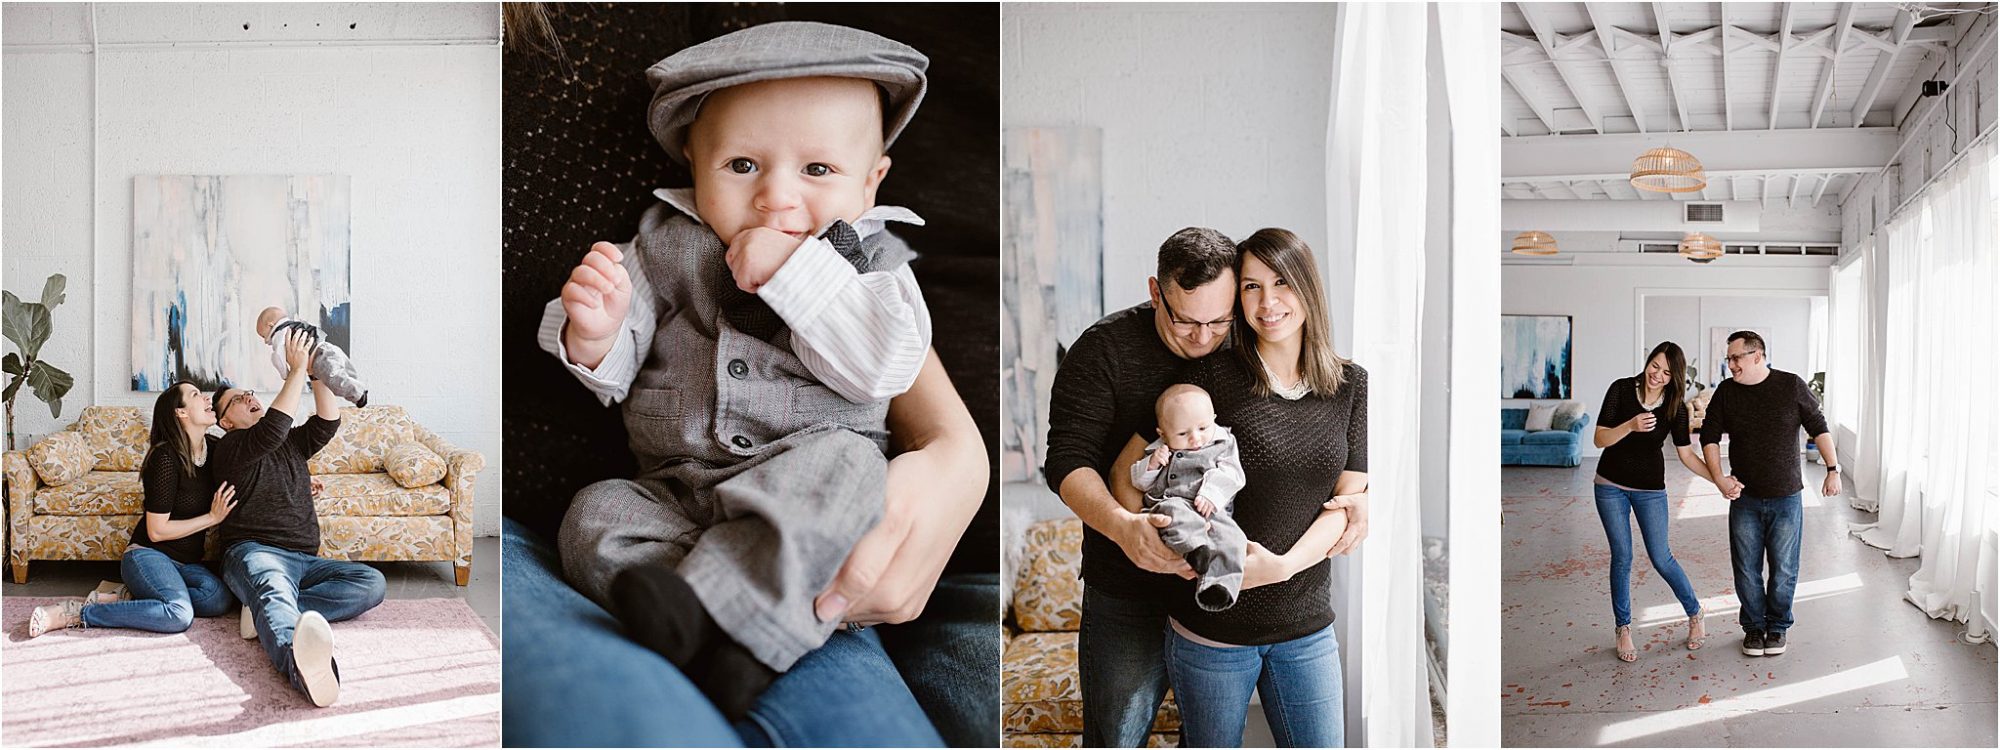 Newborn Photographer in Knoxville